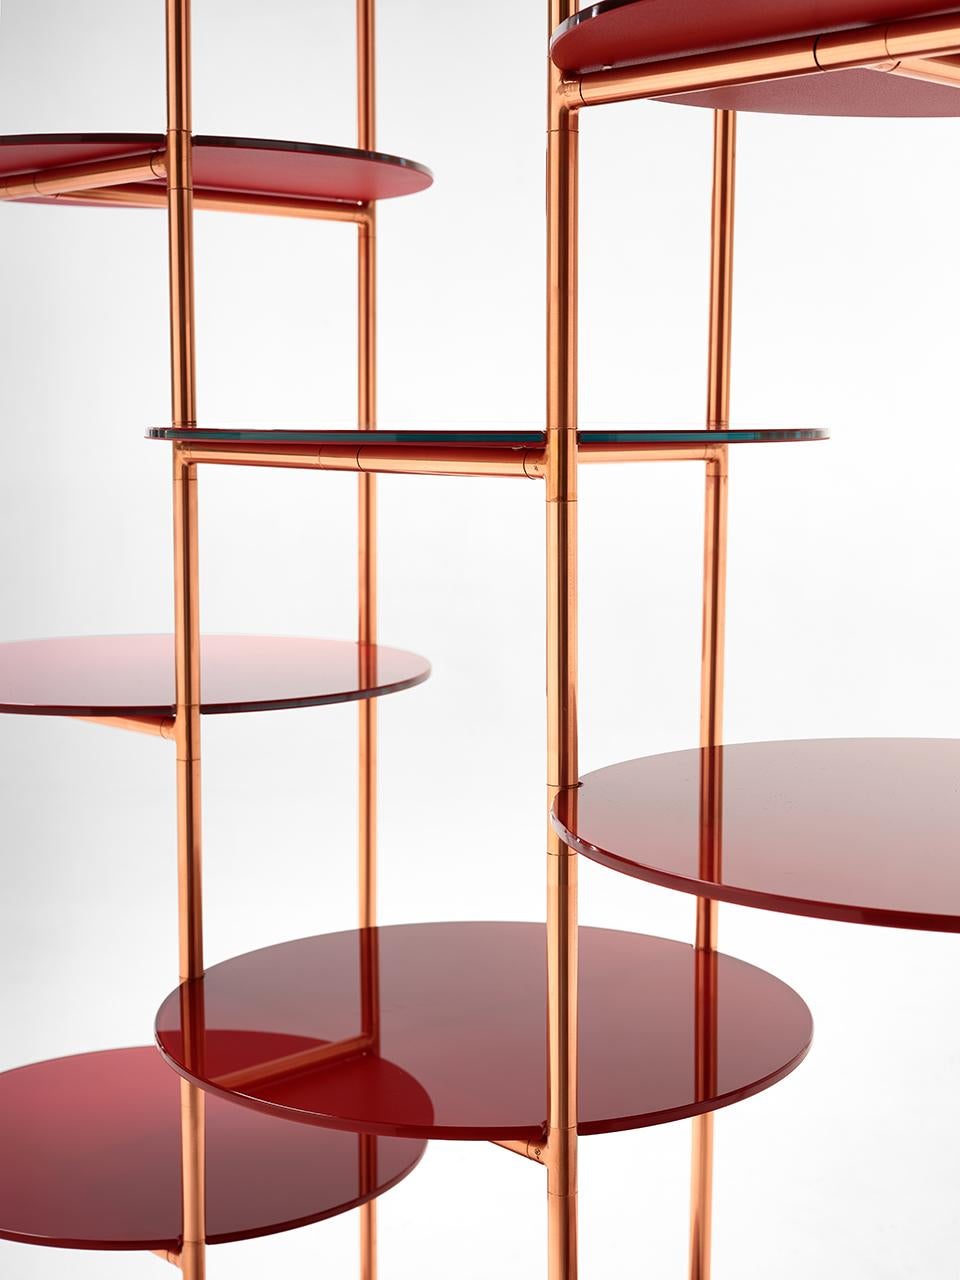 Italian 21st Century Modern Étagère With Copper Structure And Back-painted Glass Shelves For Sale